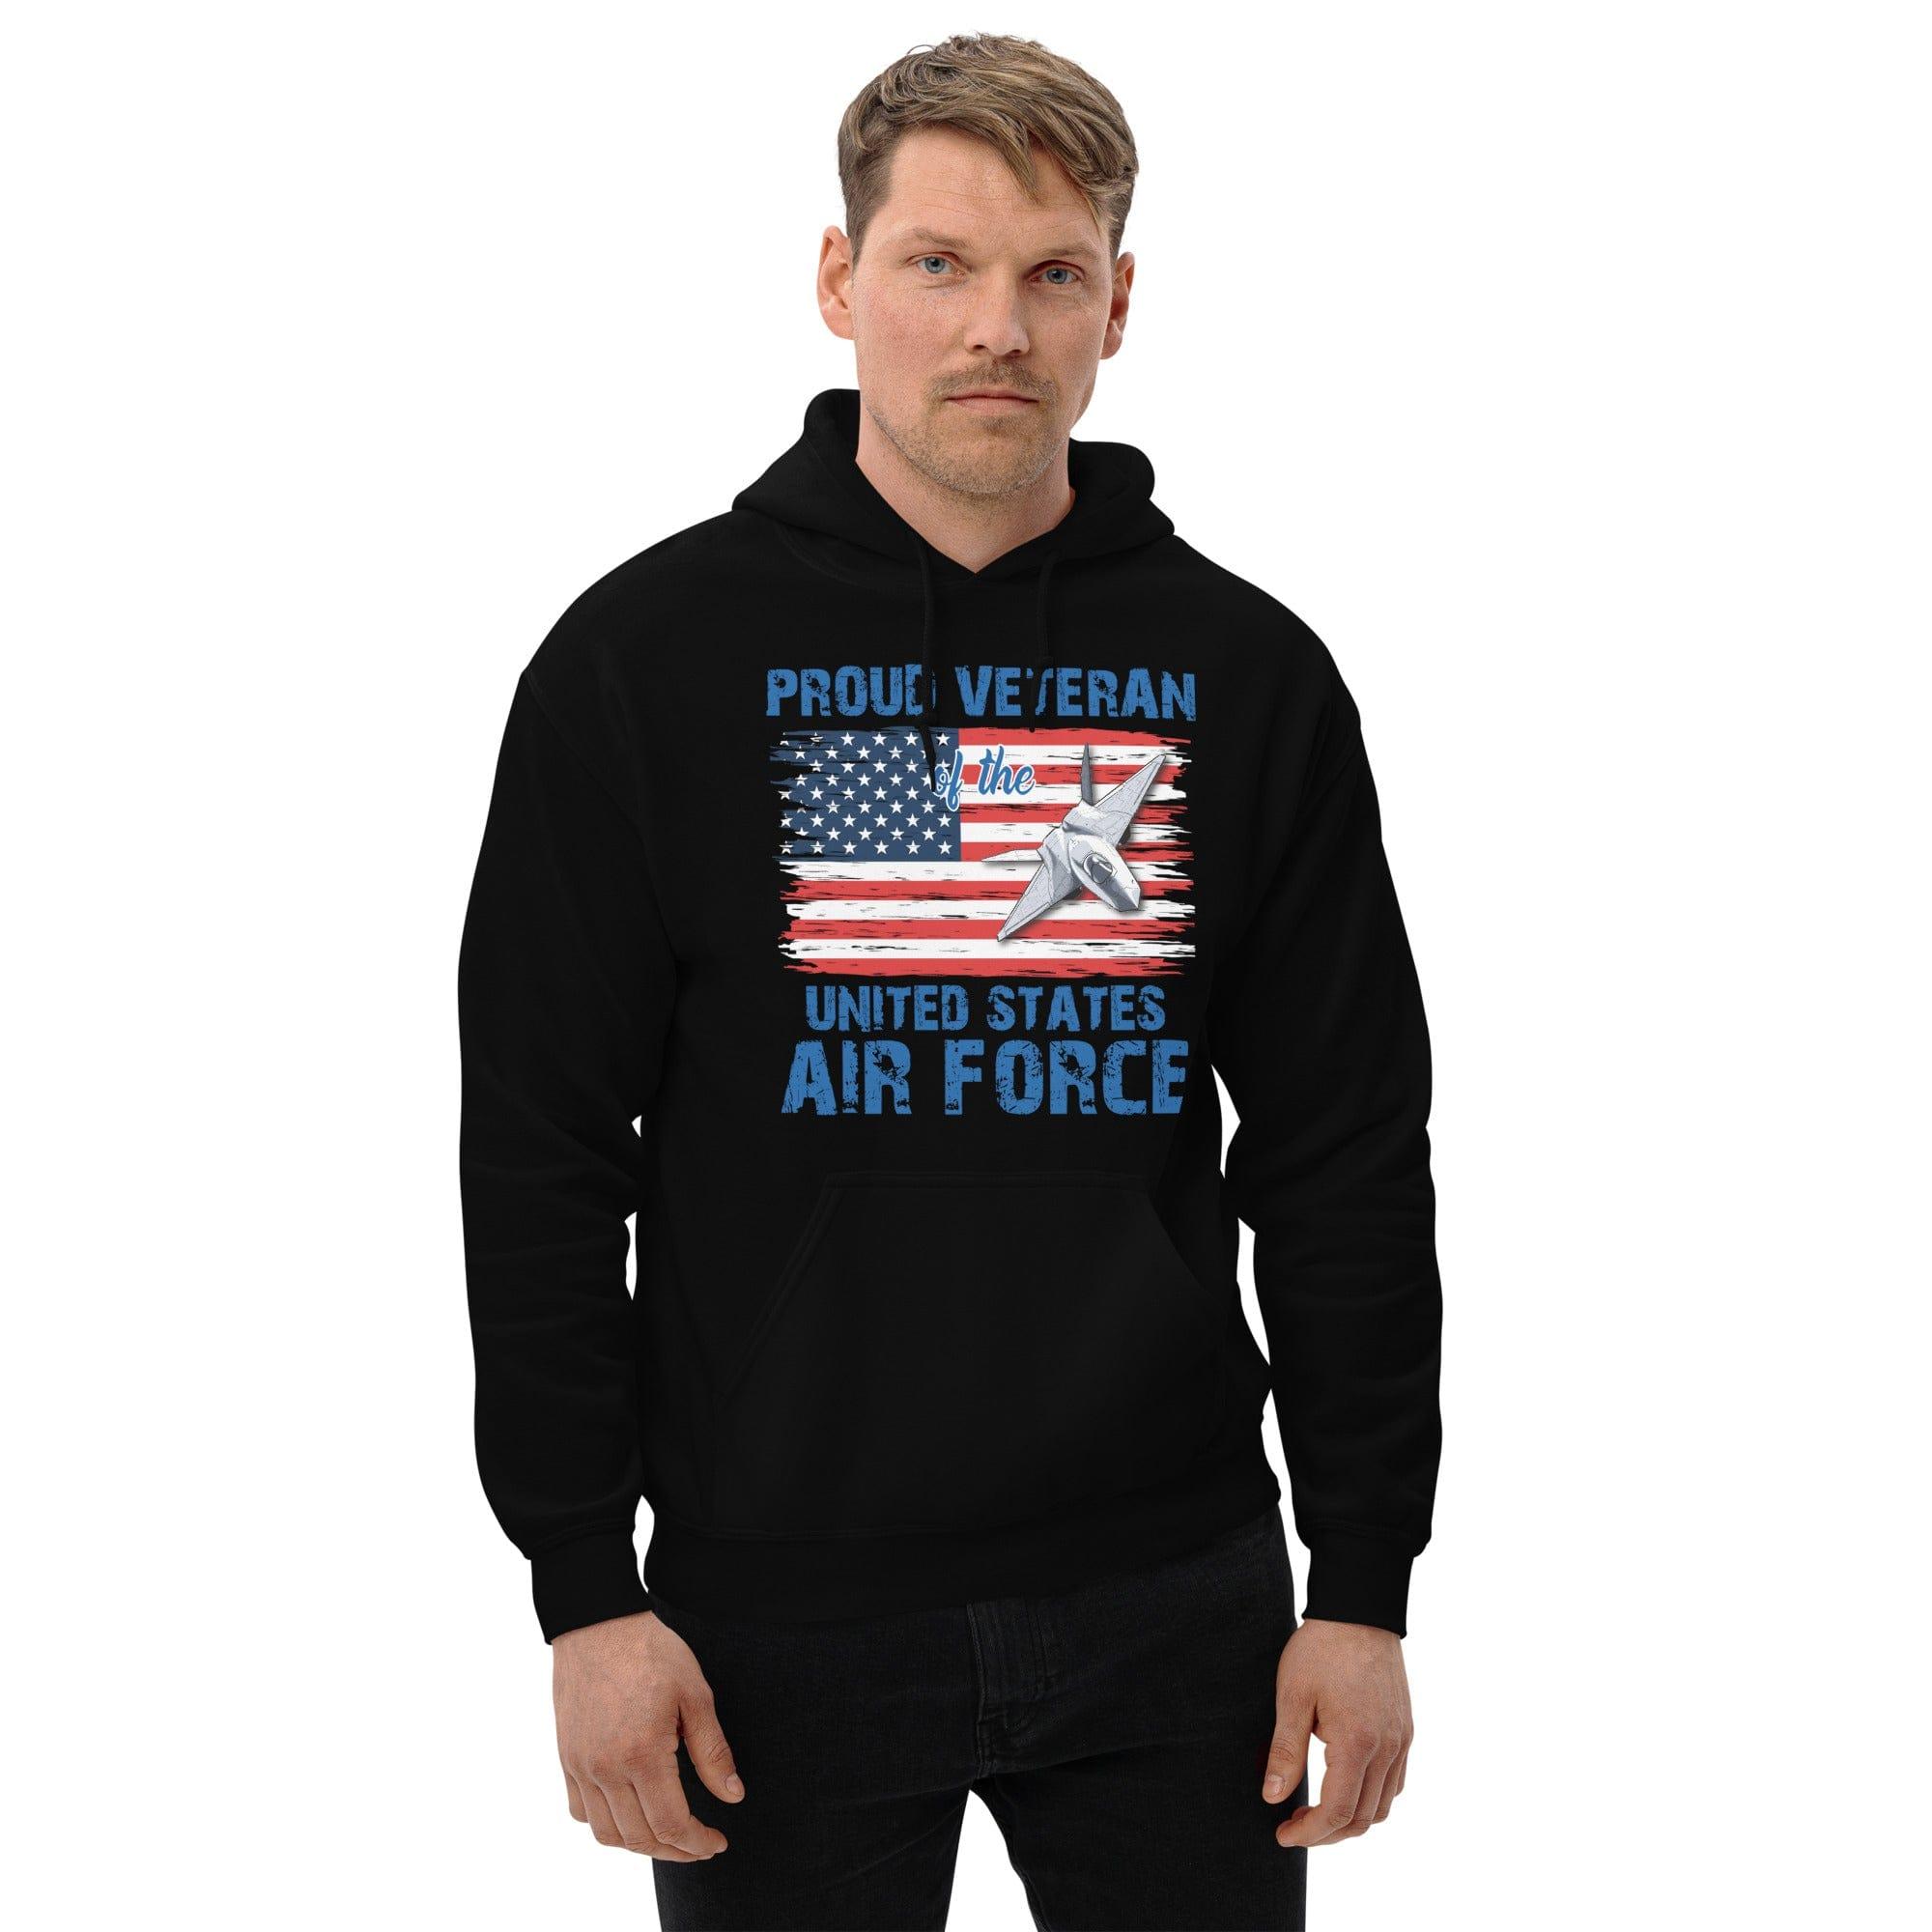 Air Force Hoodie Proud Veteran of the Unites States Air Force Unisex Pullover - TopKoalaTee